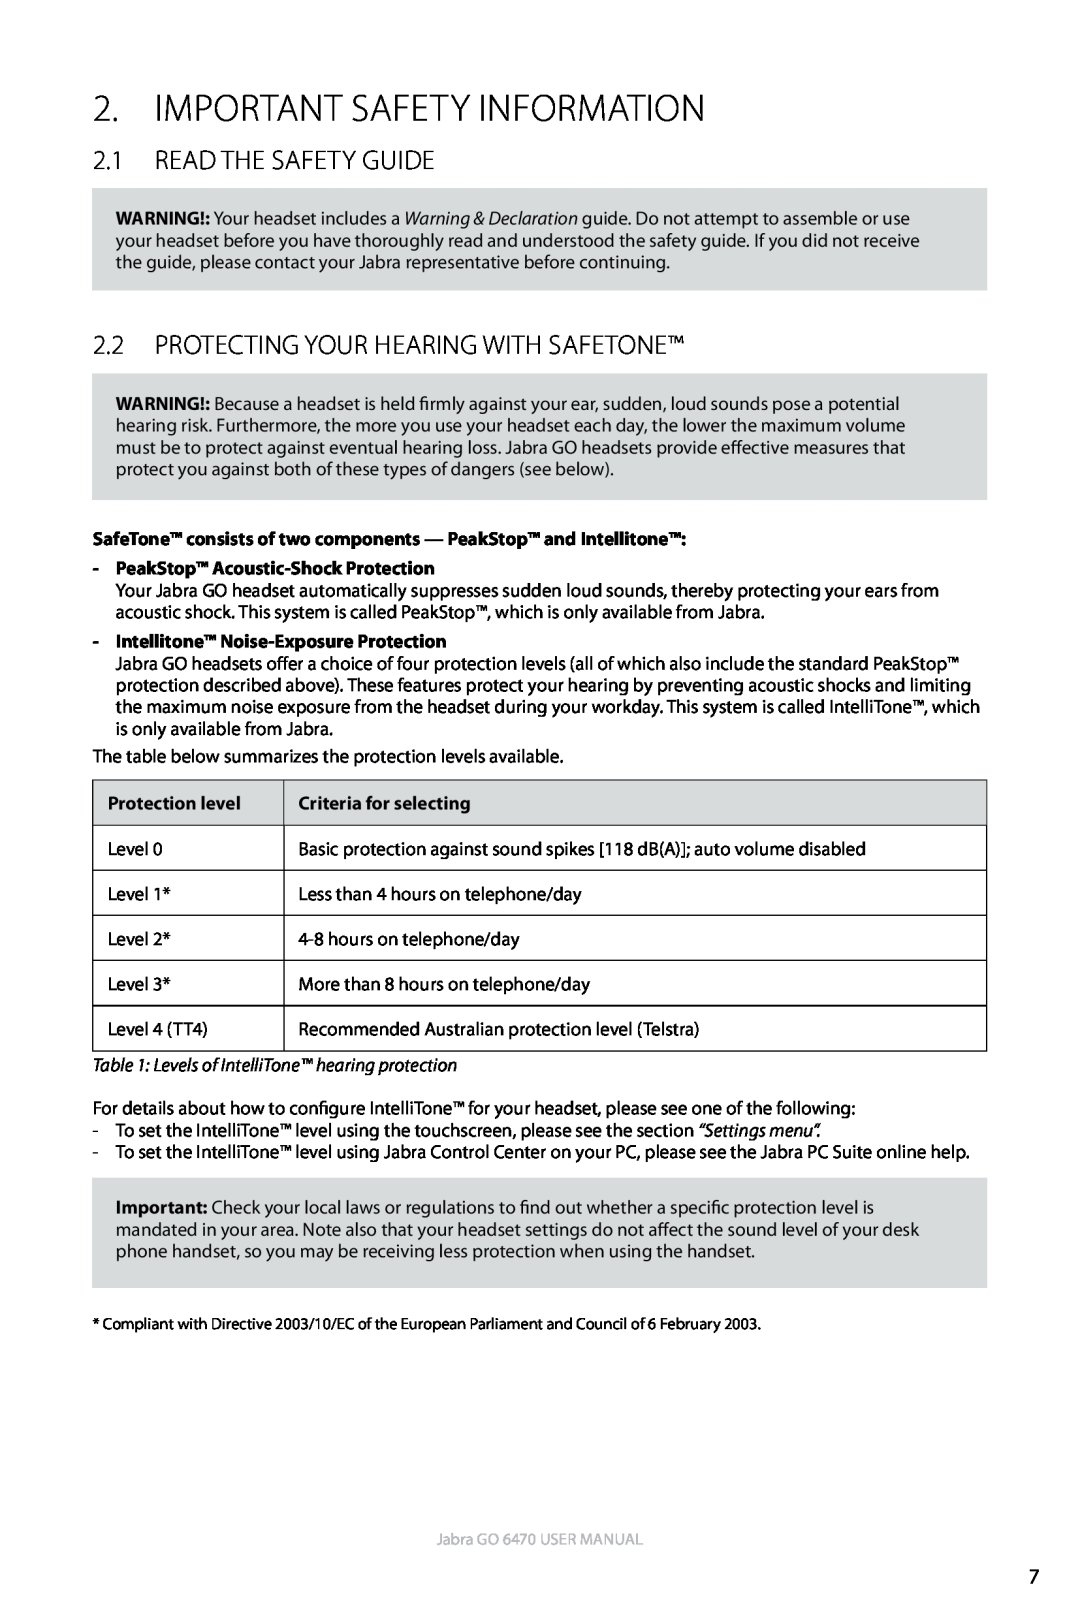 Jabra GO 6470 user manual Important Safety Information, 2.1Read the Safety guide, 2.2Protecting your Hearing with SafeTone 